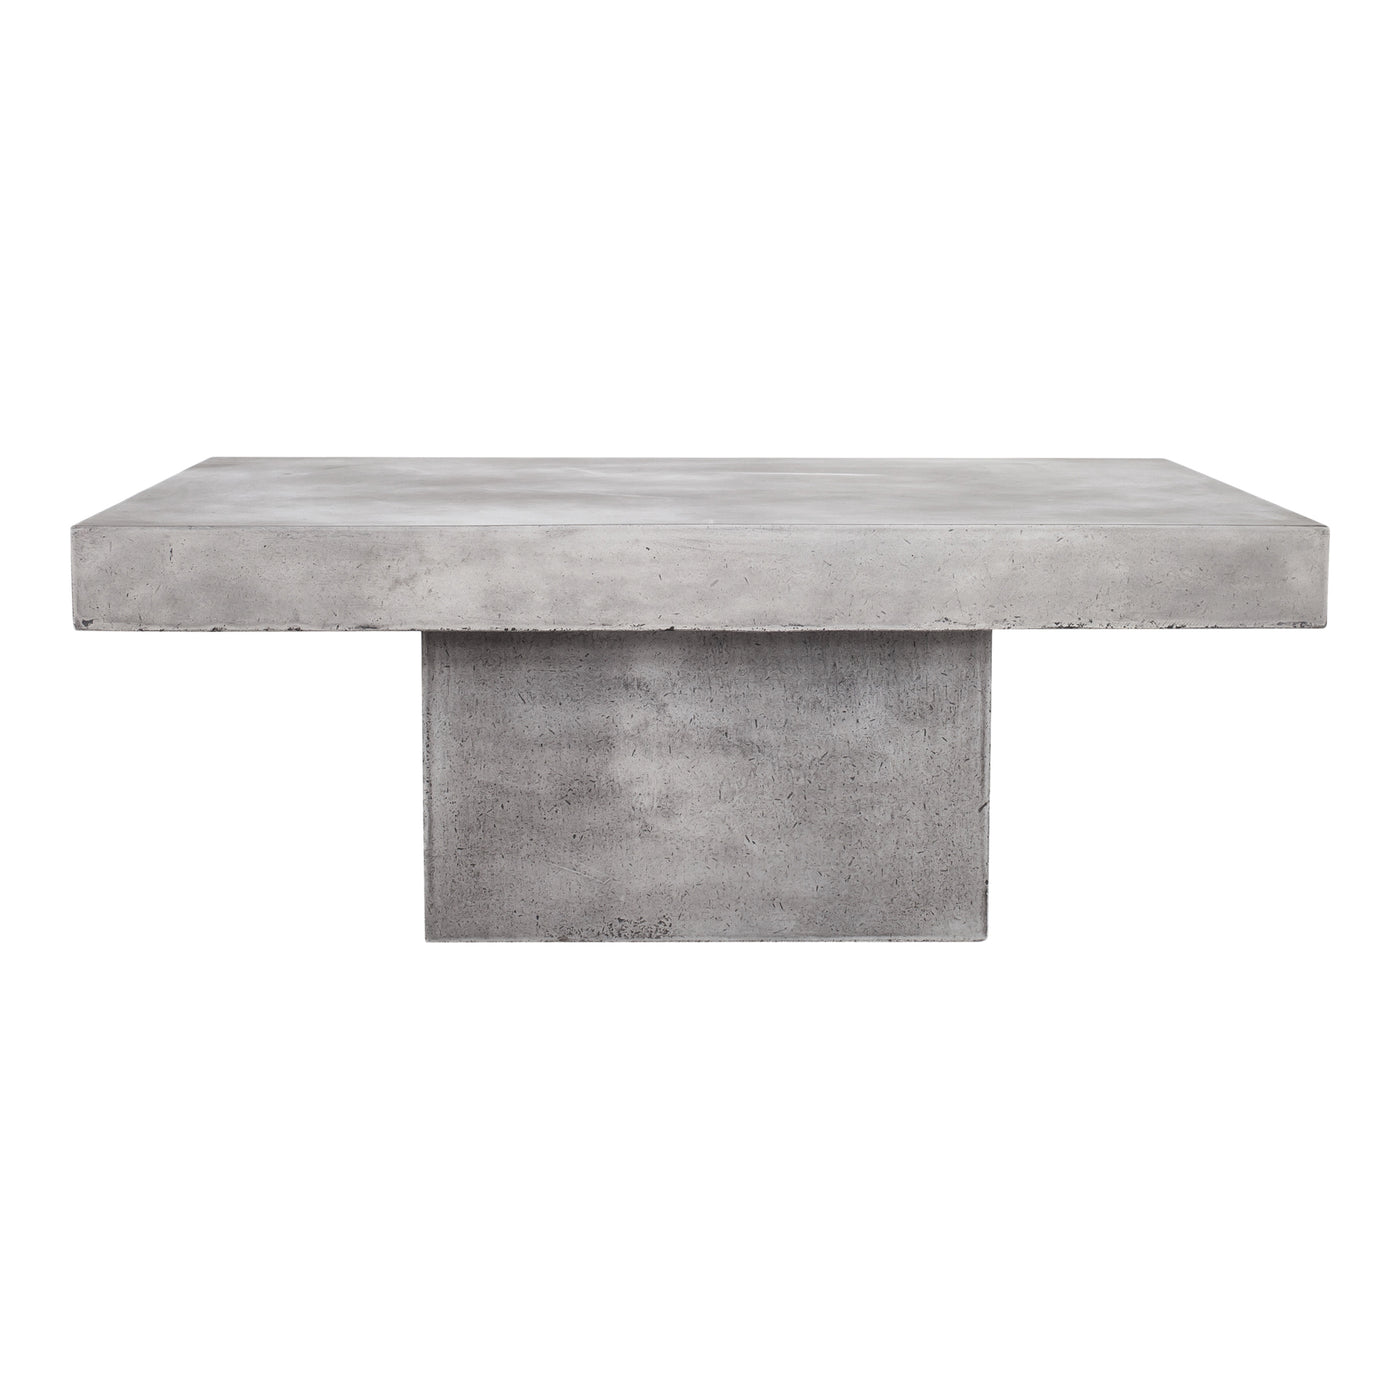 Our fiber-stone tables are made with a high-quality concrete and fiber mix, to give them the freshly modern look you want,...